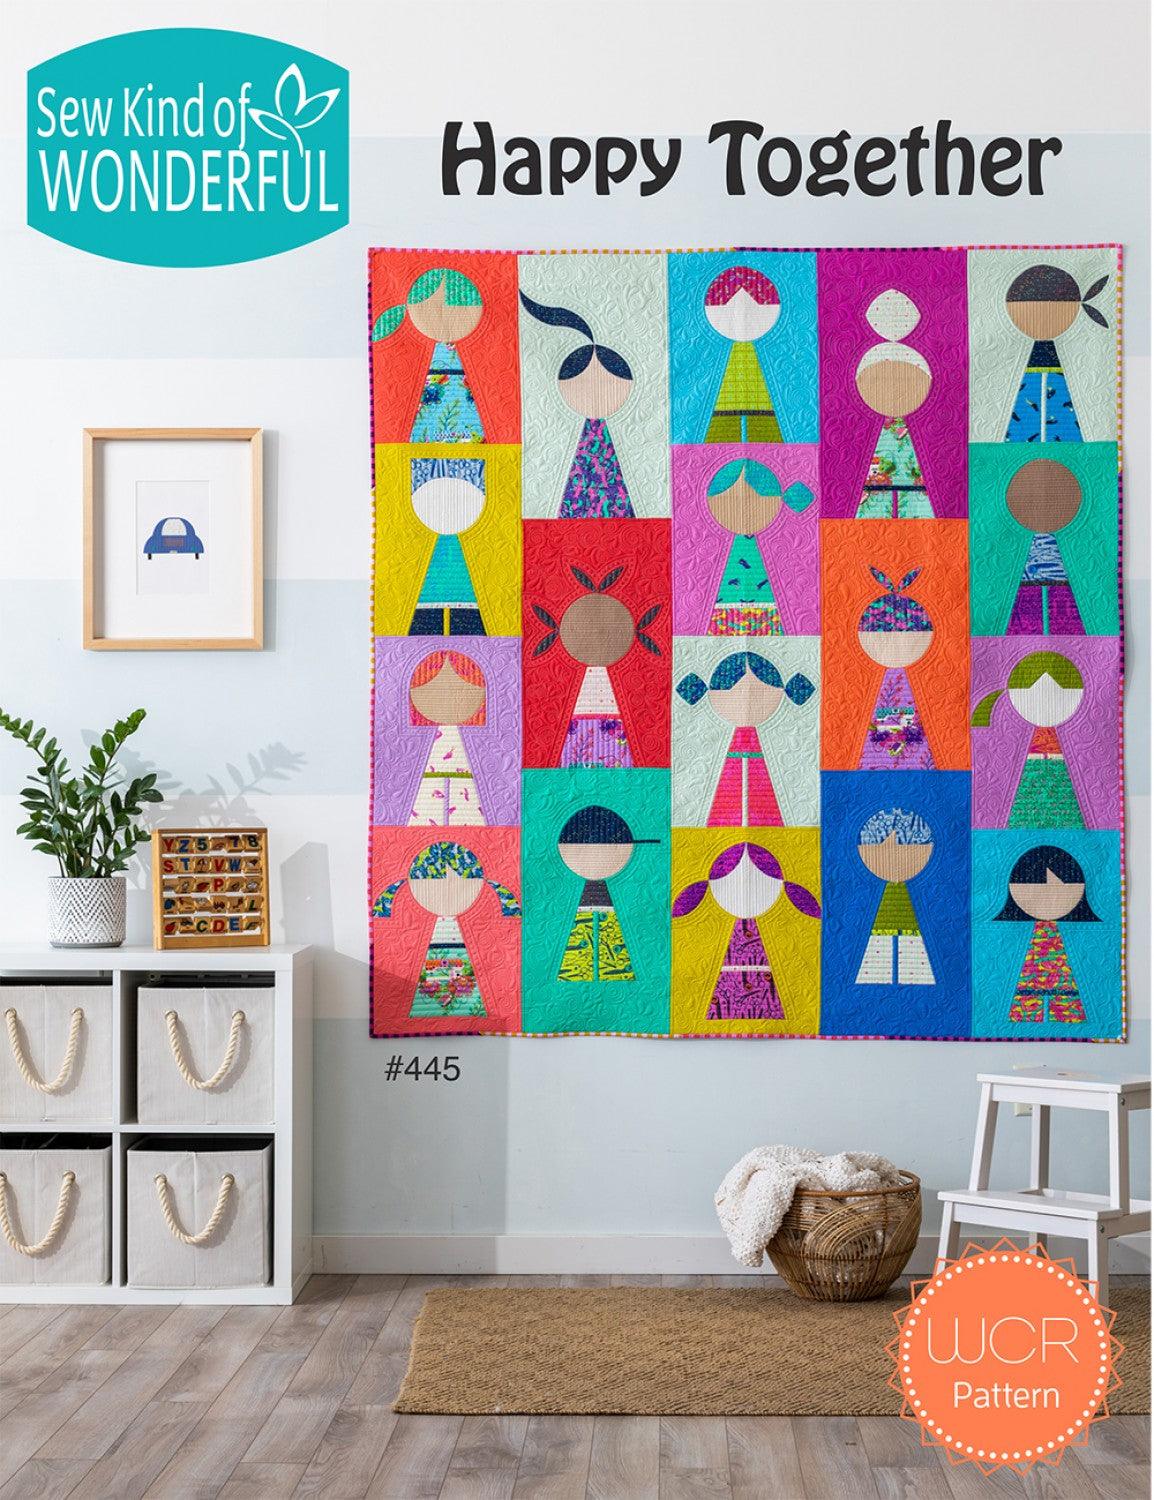 Happy Together - Quilt Pattern - Sew Kind of Wonderful - Kawartha Quilting and Sewing LTD.